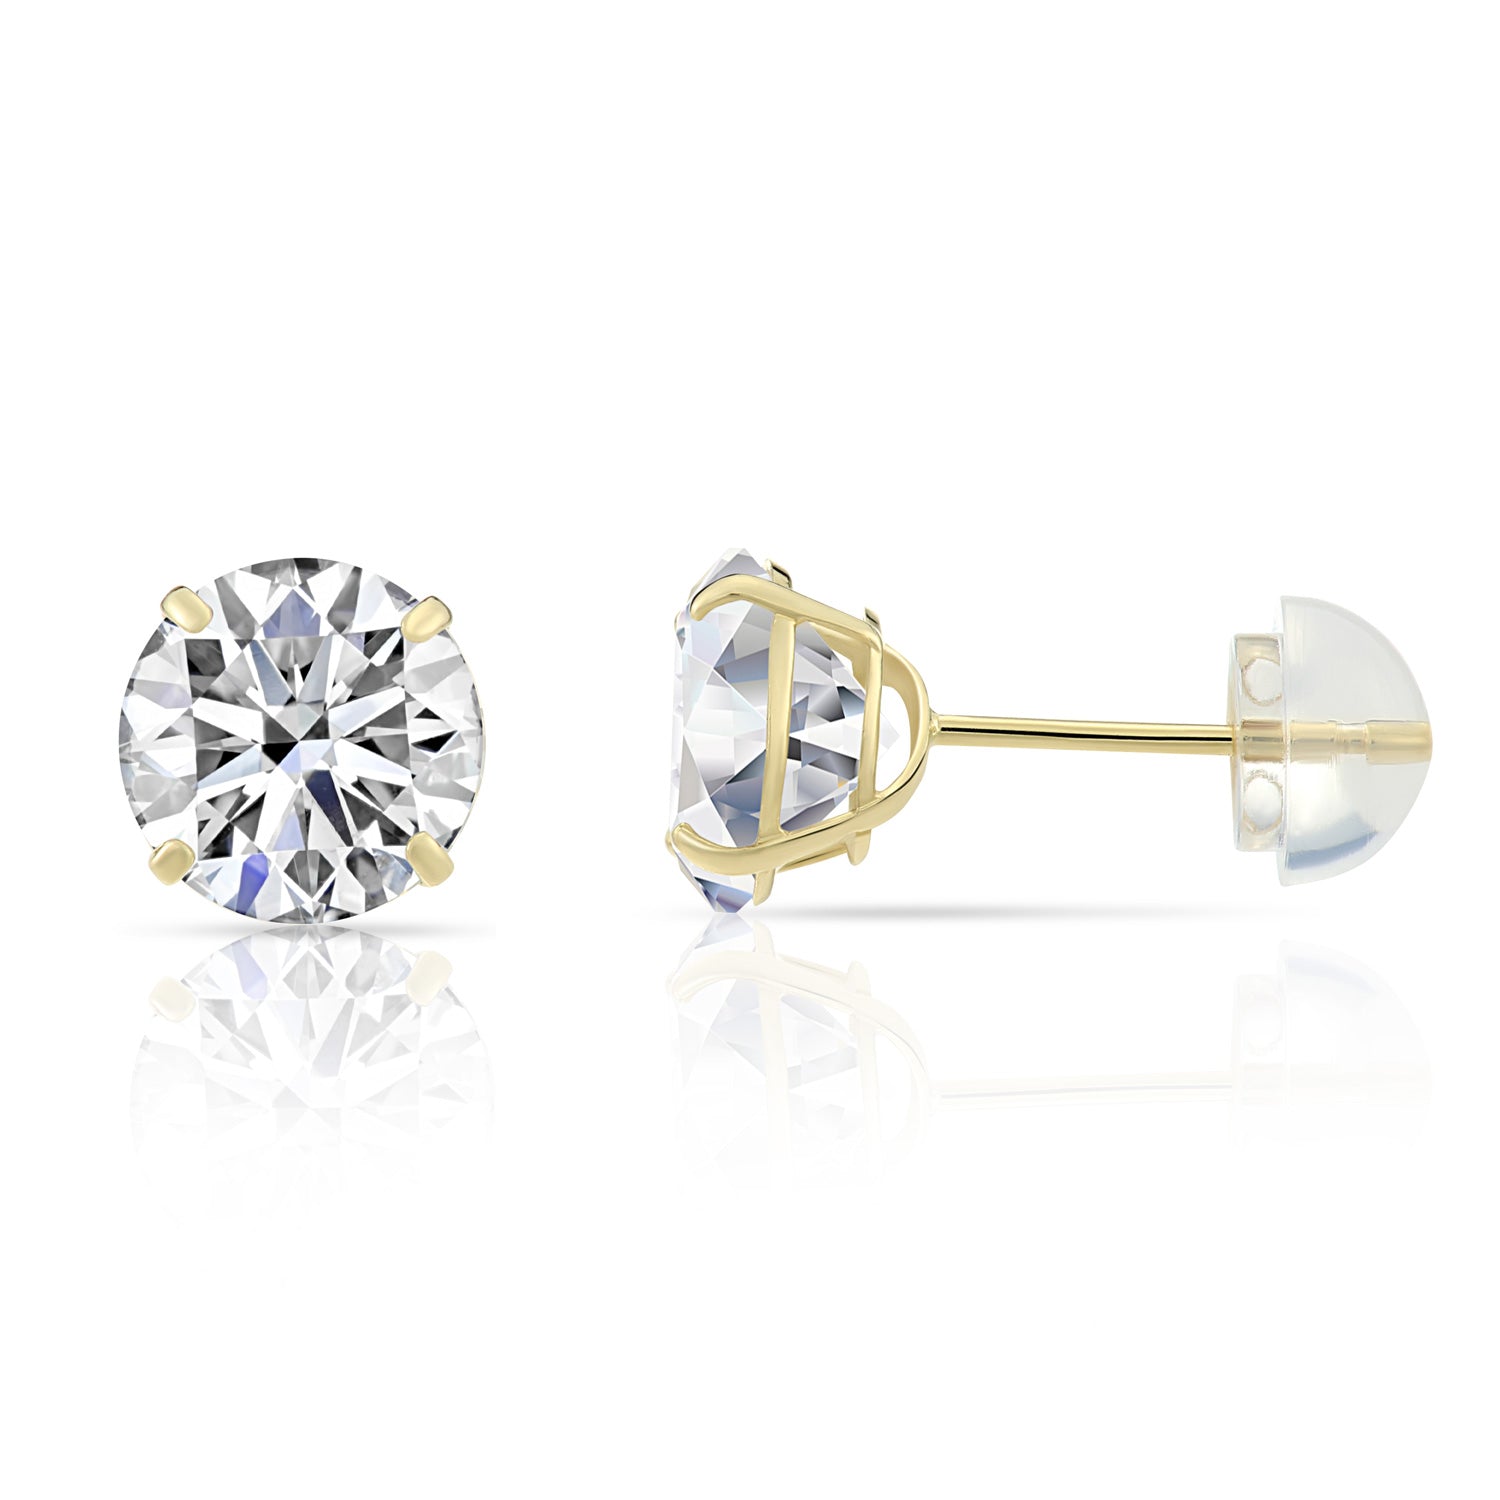 14k Yellow Gold and Cubic Zirconia Stud Earrings, Silicone